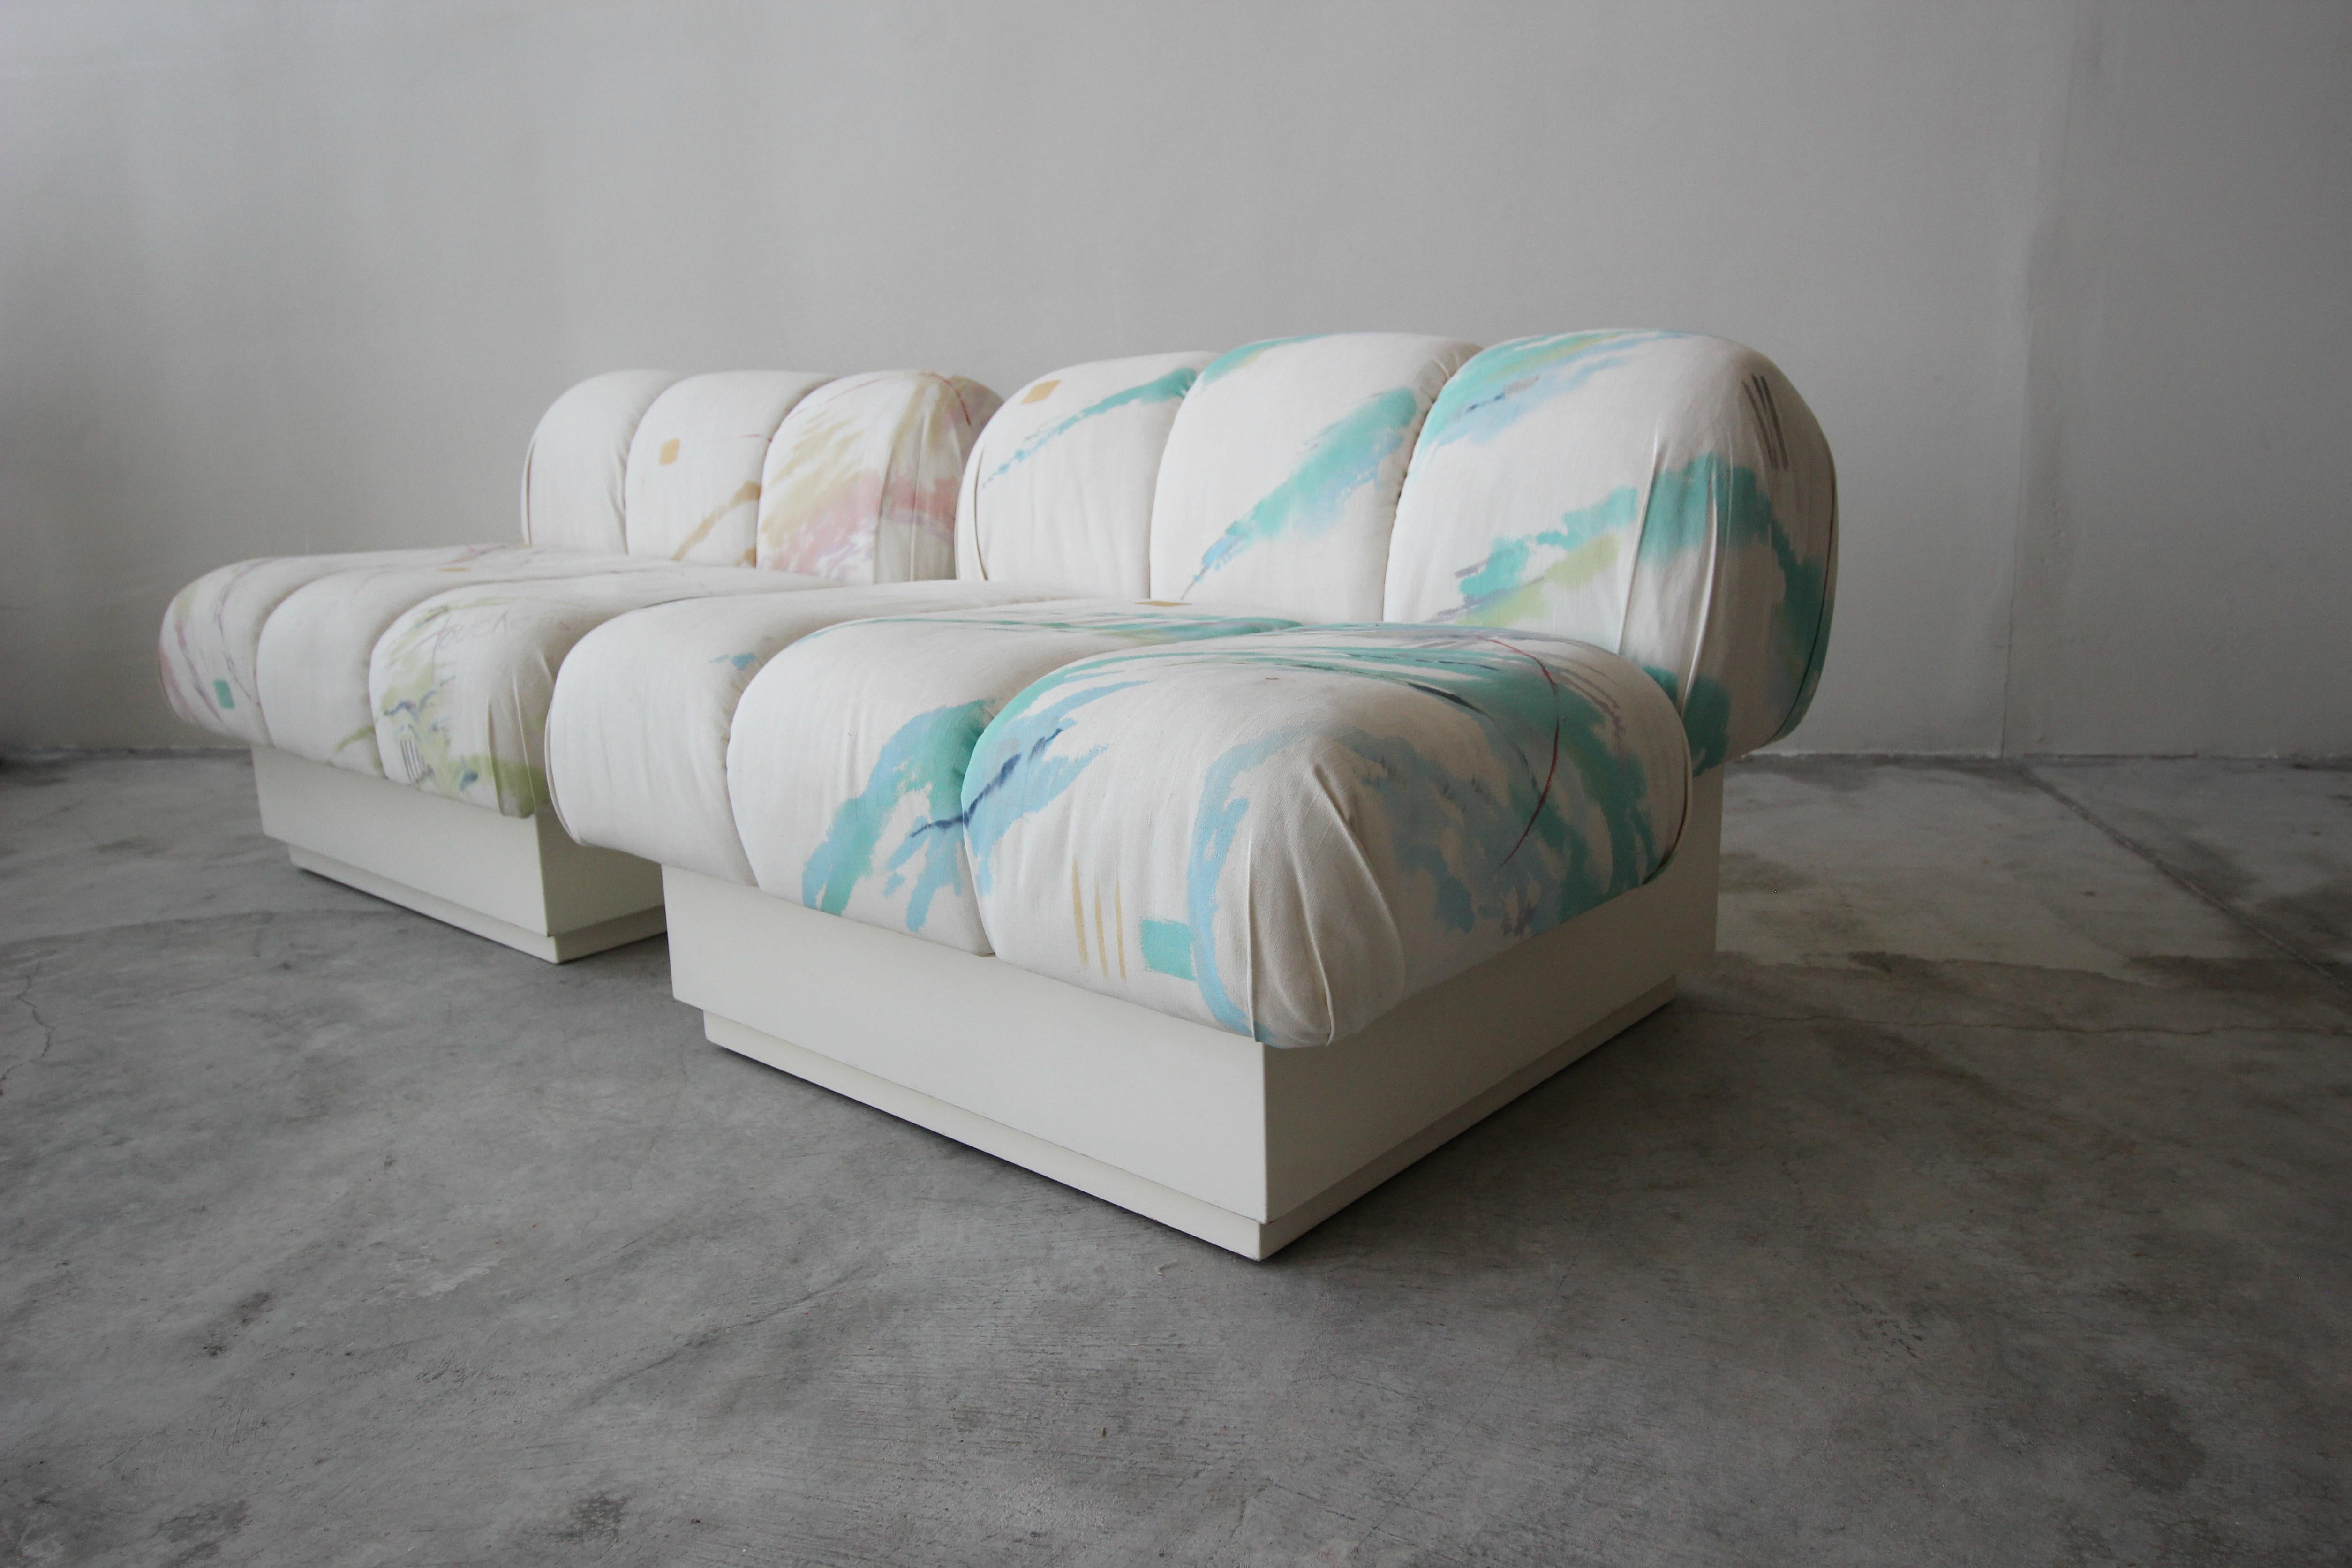 Incredible and large, Postmodern Italian style slipper chairs on a plinth bases. Most likely a custom pieces, these beauties truly have lines and curves worth coveting. 

Kept as found, in their pop art style, Touché, artist signed fabric. Chairs